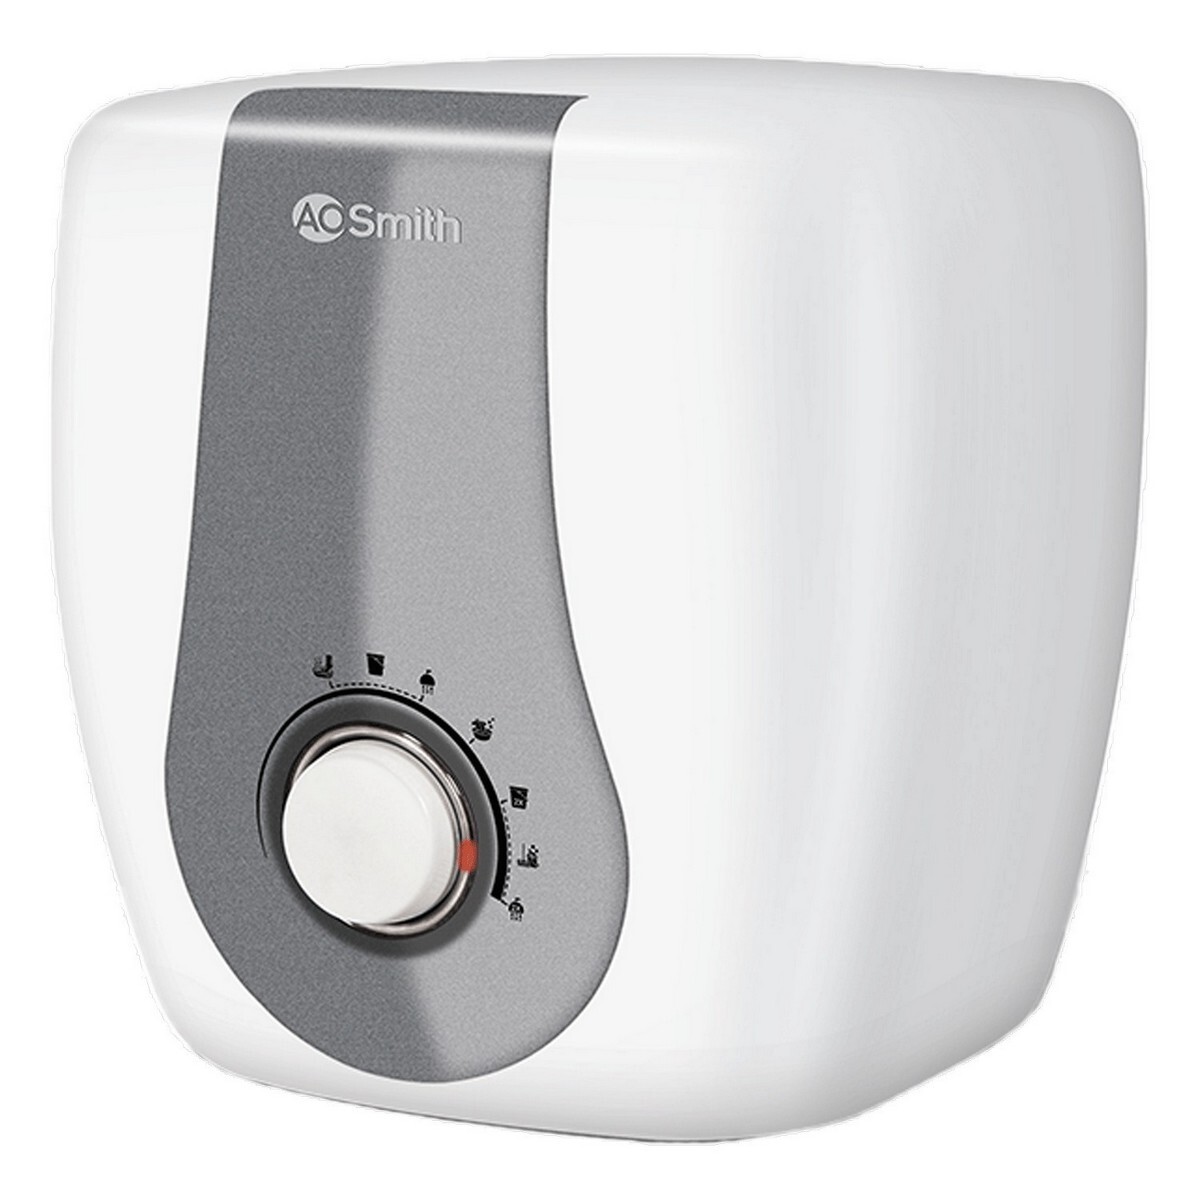 AO Smith Storage Water Heater Finesse 10L White